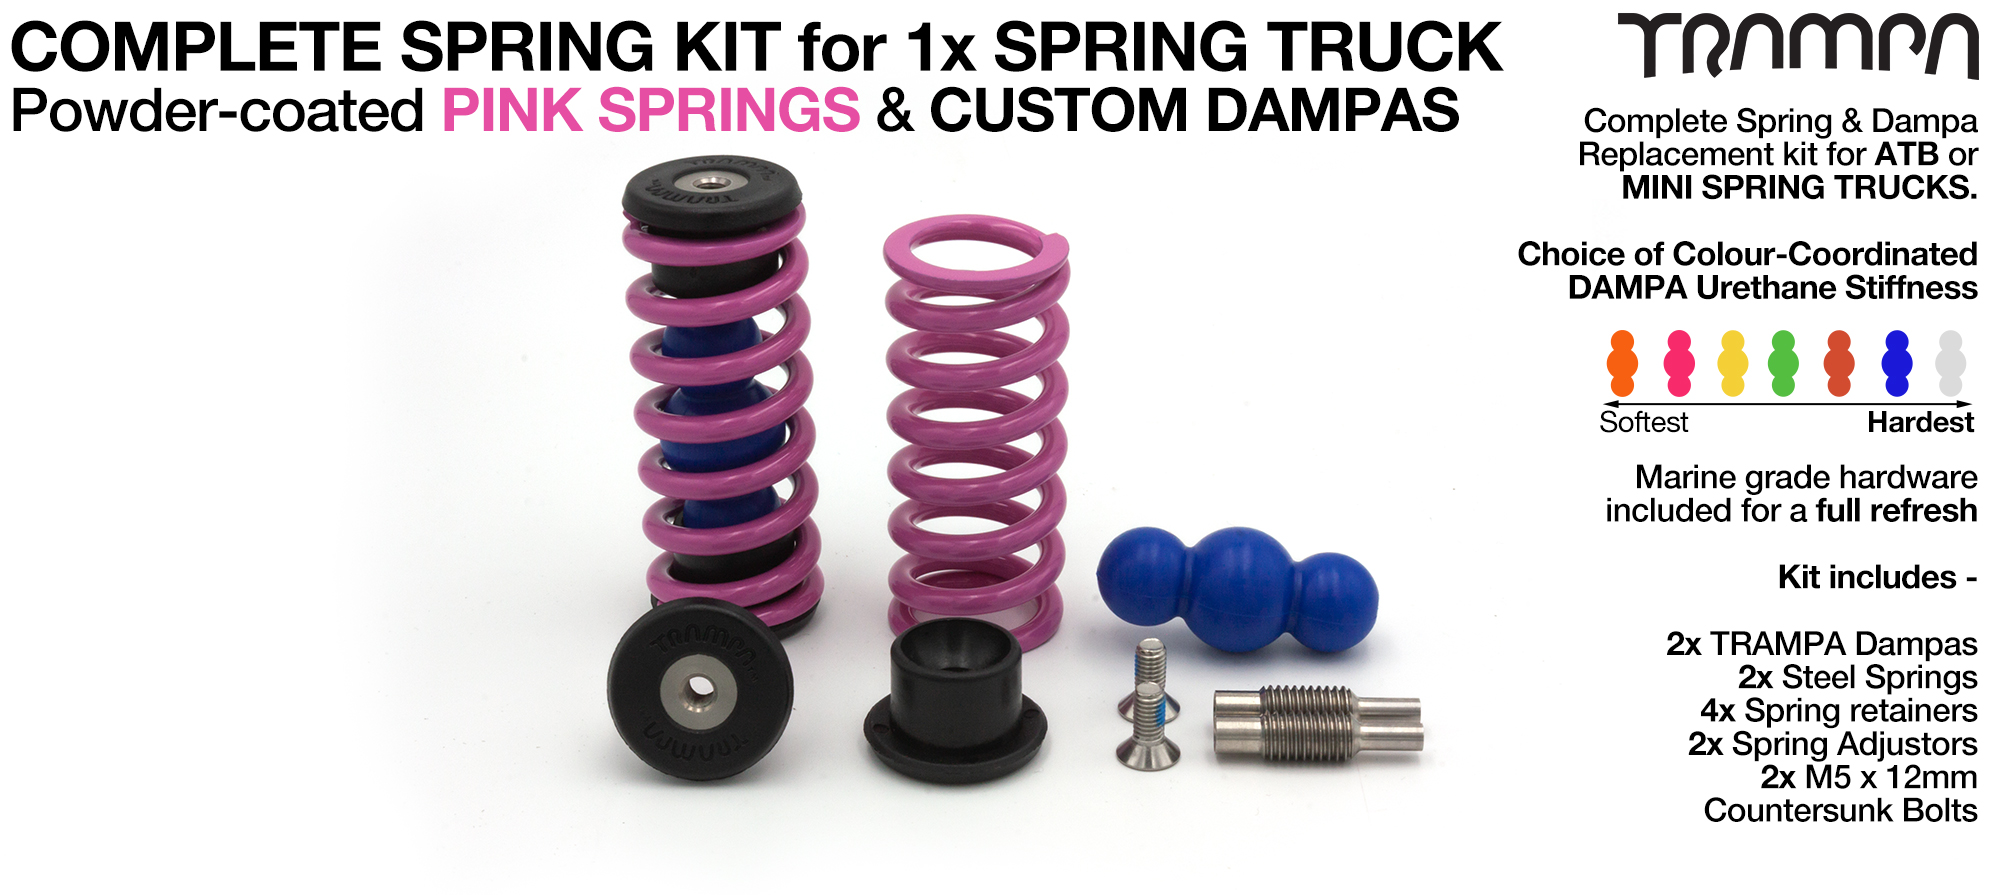 Spring kit Complete for 1x Truck - 2x Springs 2x Dampas 4x Spring Retainers 2x Spring Adjuster & 2 M5x12mm Countersunk Bolt 